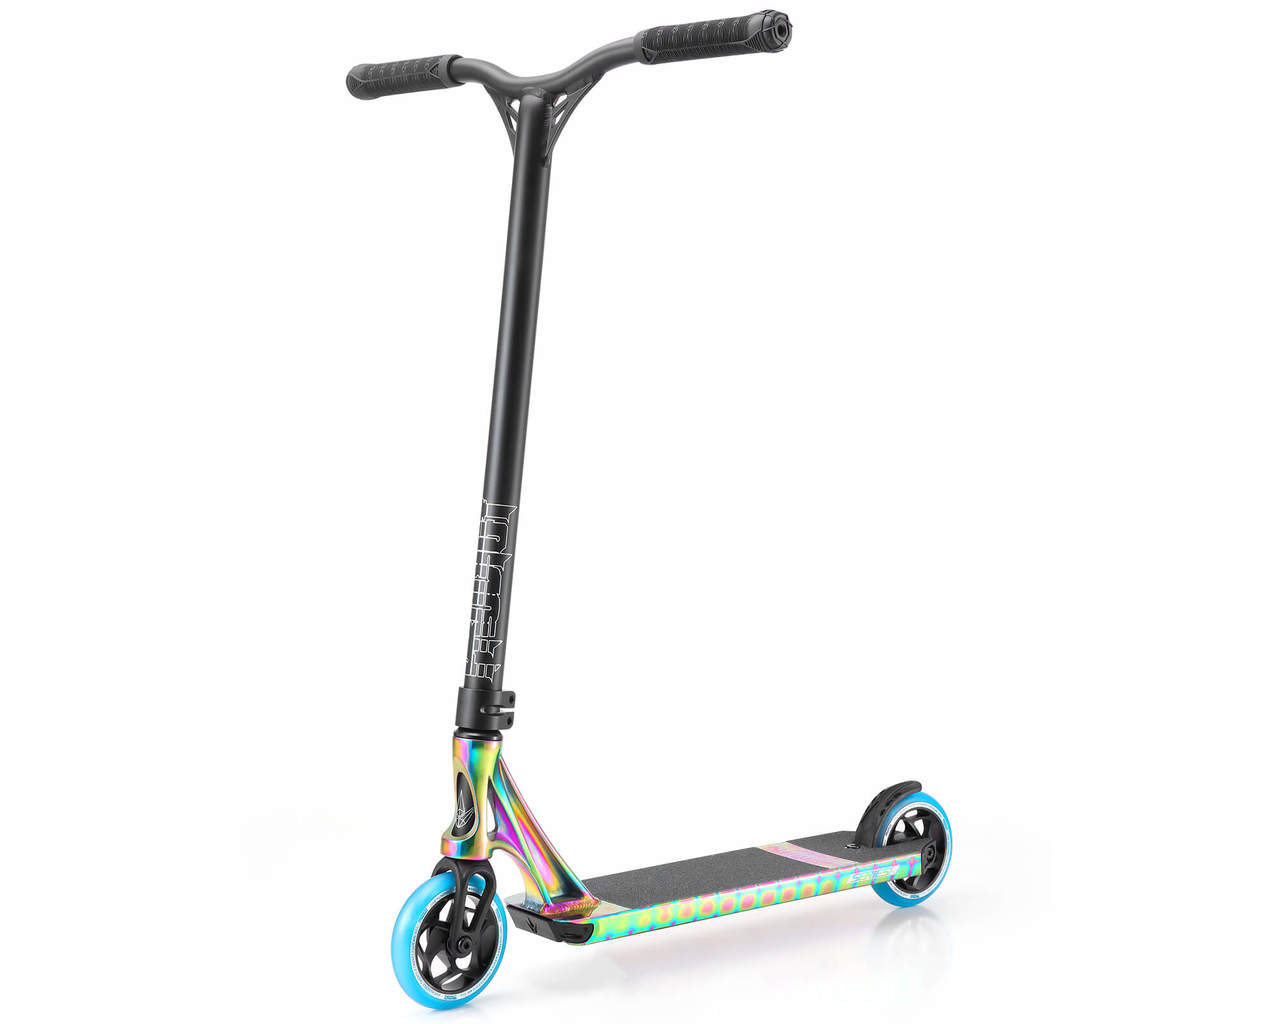 Blunt Prodigy S8 Complete Scooter - Oil Slick